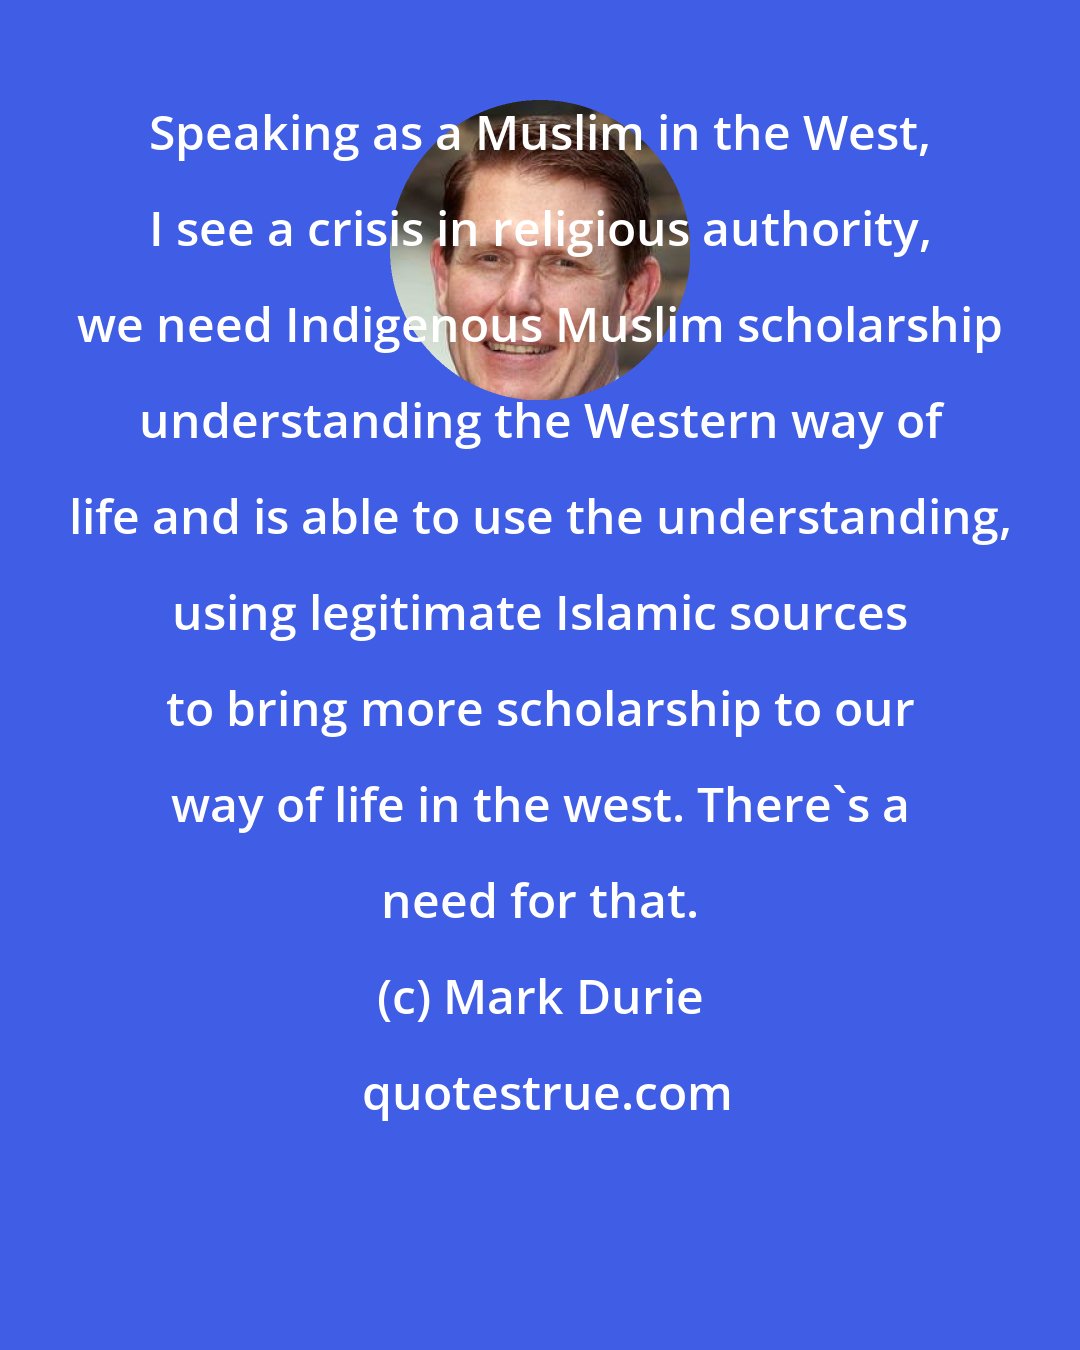 Mark Durie: Speaking as a Muslim in the West, I see a crisis in religious authority, we need Indigenous Muslim scholarship understanding the Western way of life and is able to use the understanding, using legitimate Islamic sources to bring more scholarship to our way of life in the west. There's a need for that.